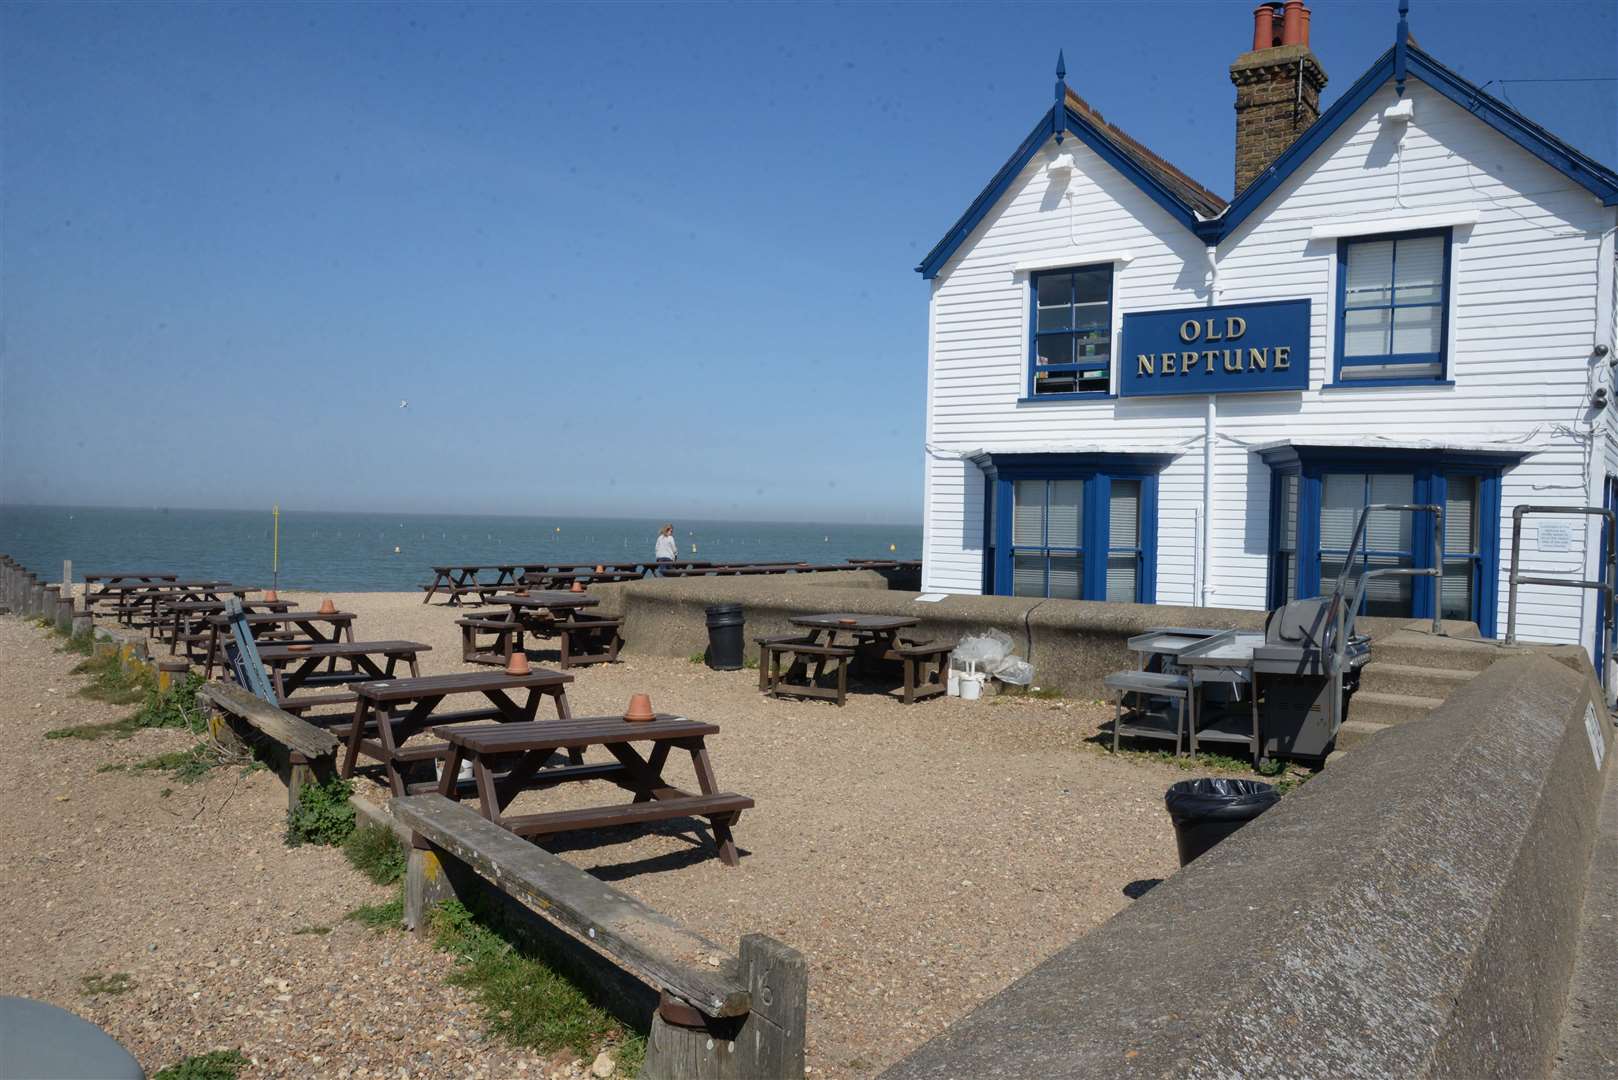 The Old Neptune pub in West Beach, Whitstable. Picture: Chris Davey